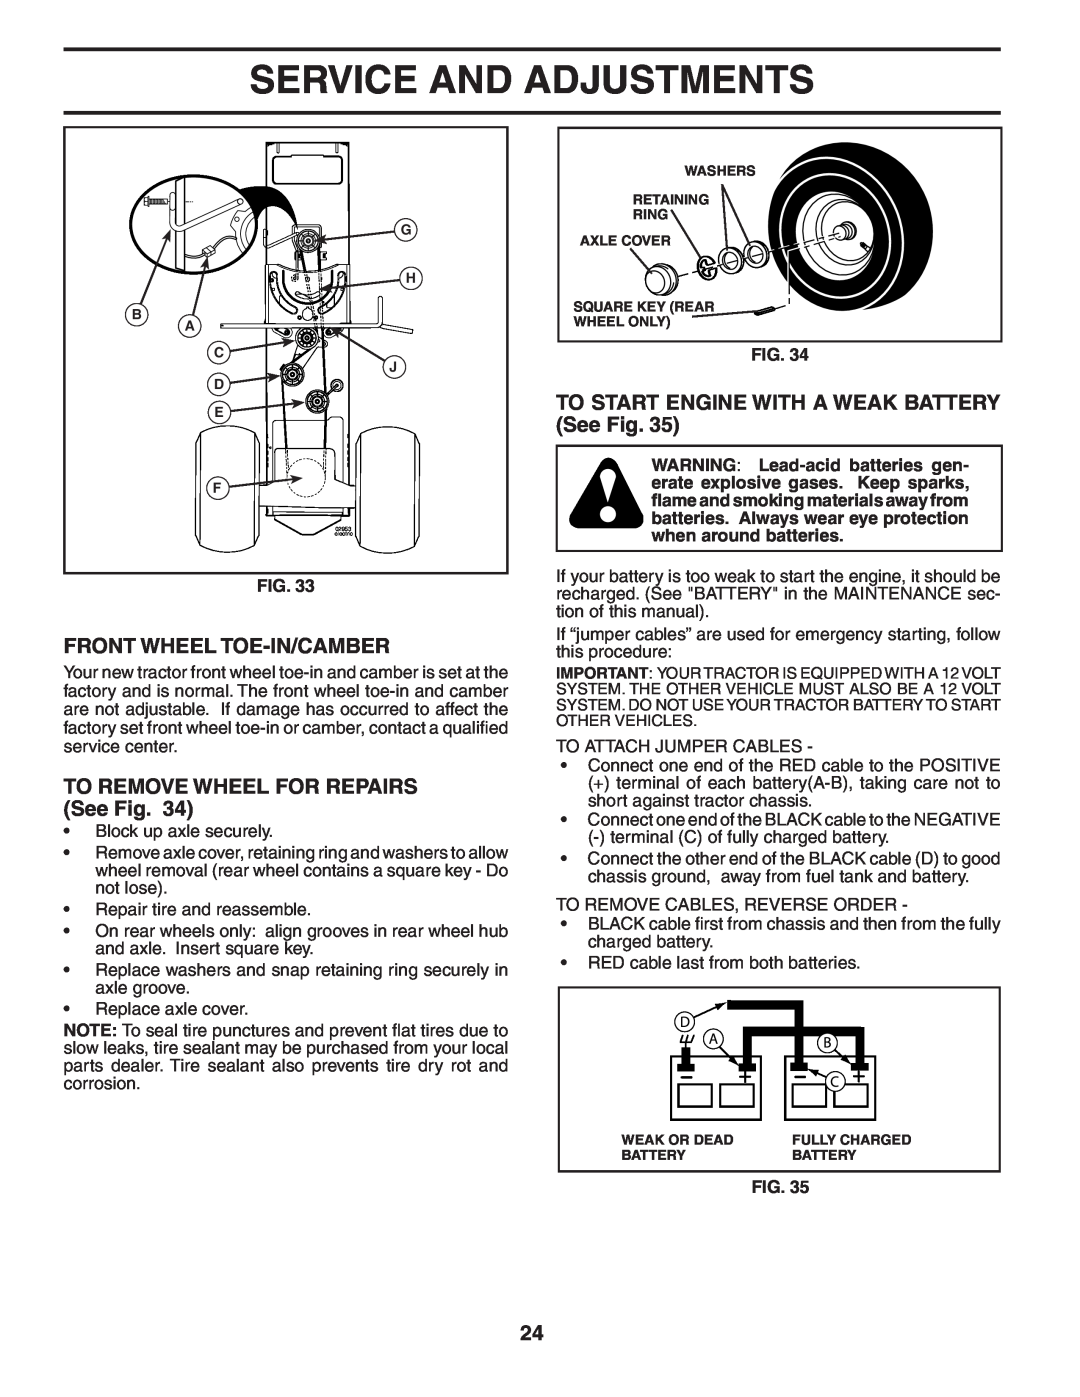 Husqvarna YTH2454T owner manual Front Wheel Toe-In/Camber, TO REMOVE WHEEL FOR REPAIRS See Fig, Service And Adjustments 